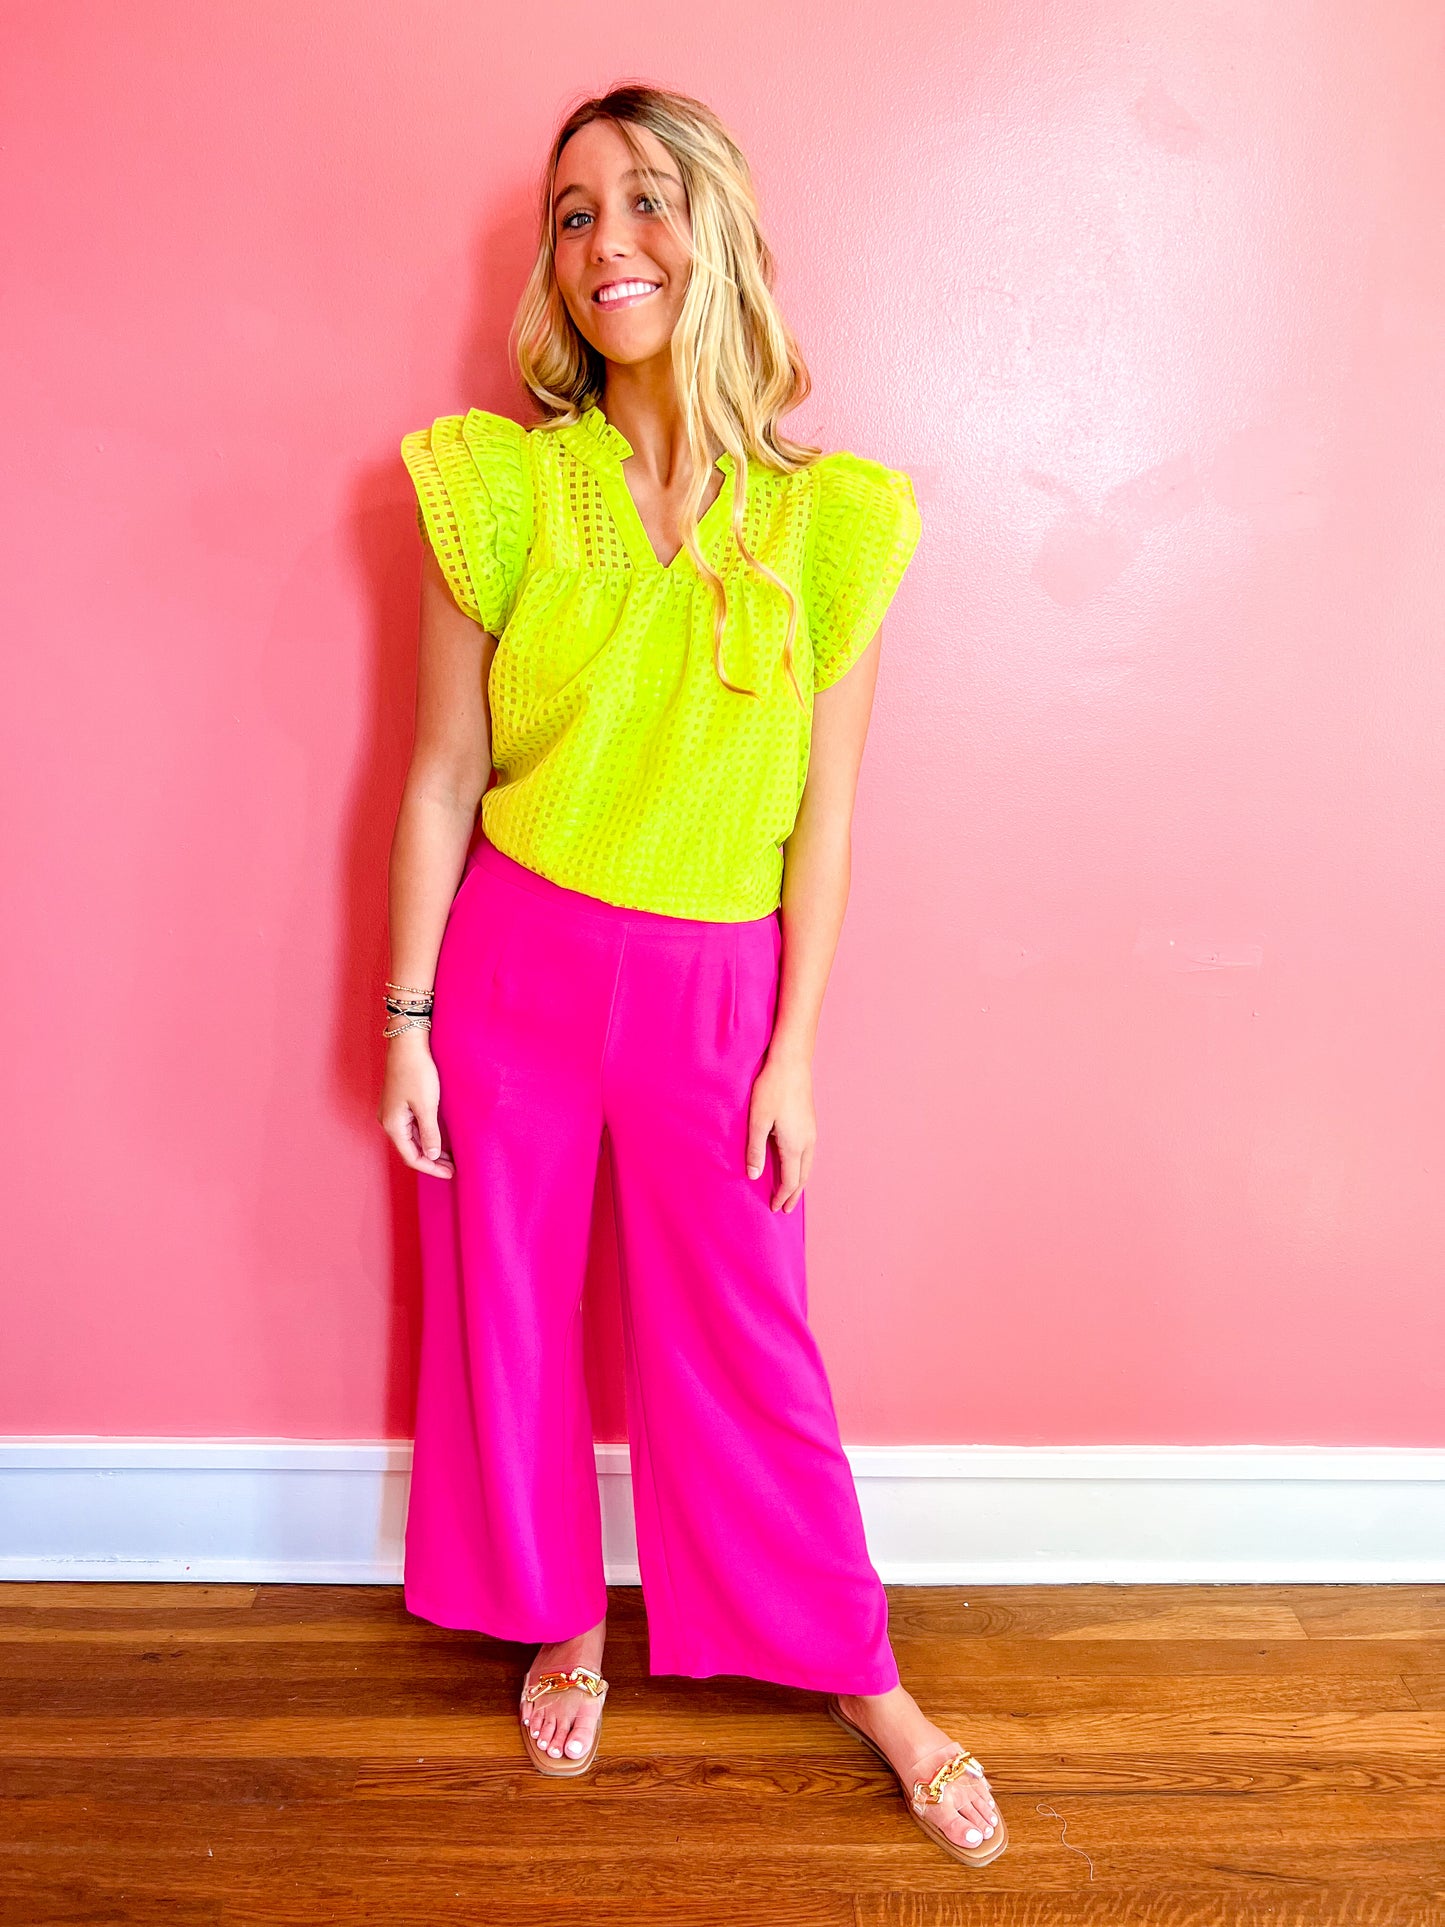 Hot Pink Trousers